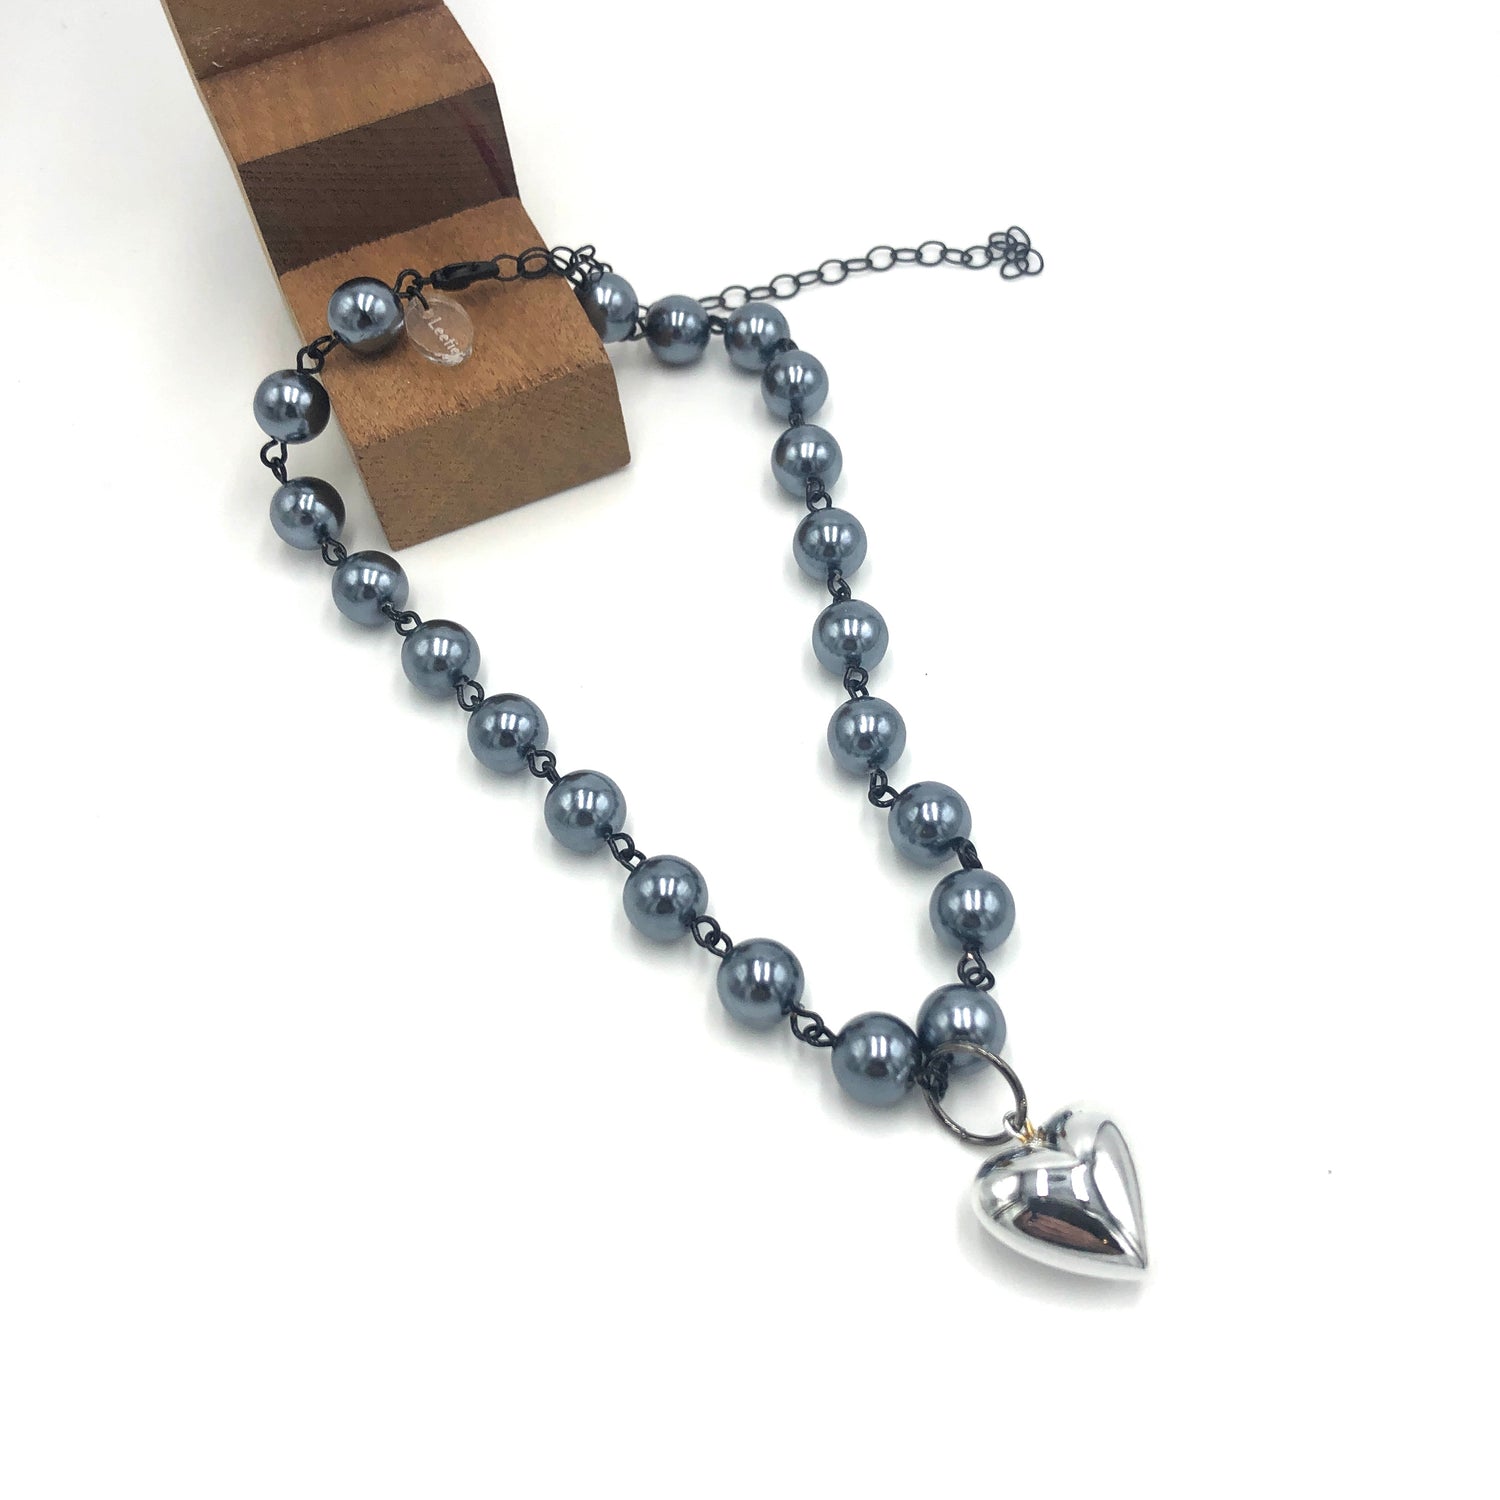 Grey Luster &amp; Silver Heart Necklace